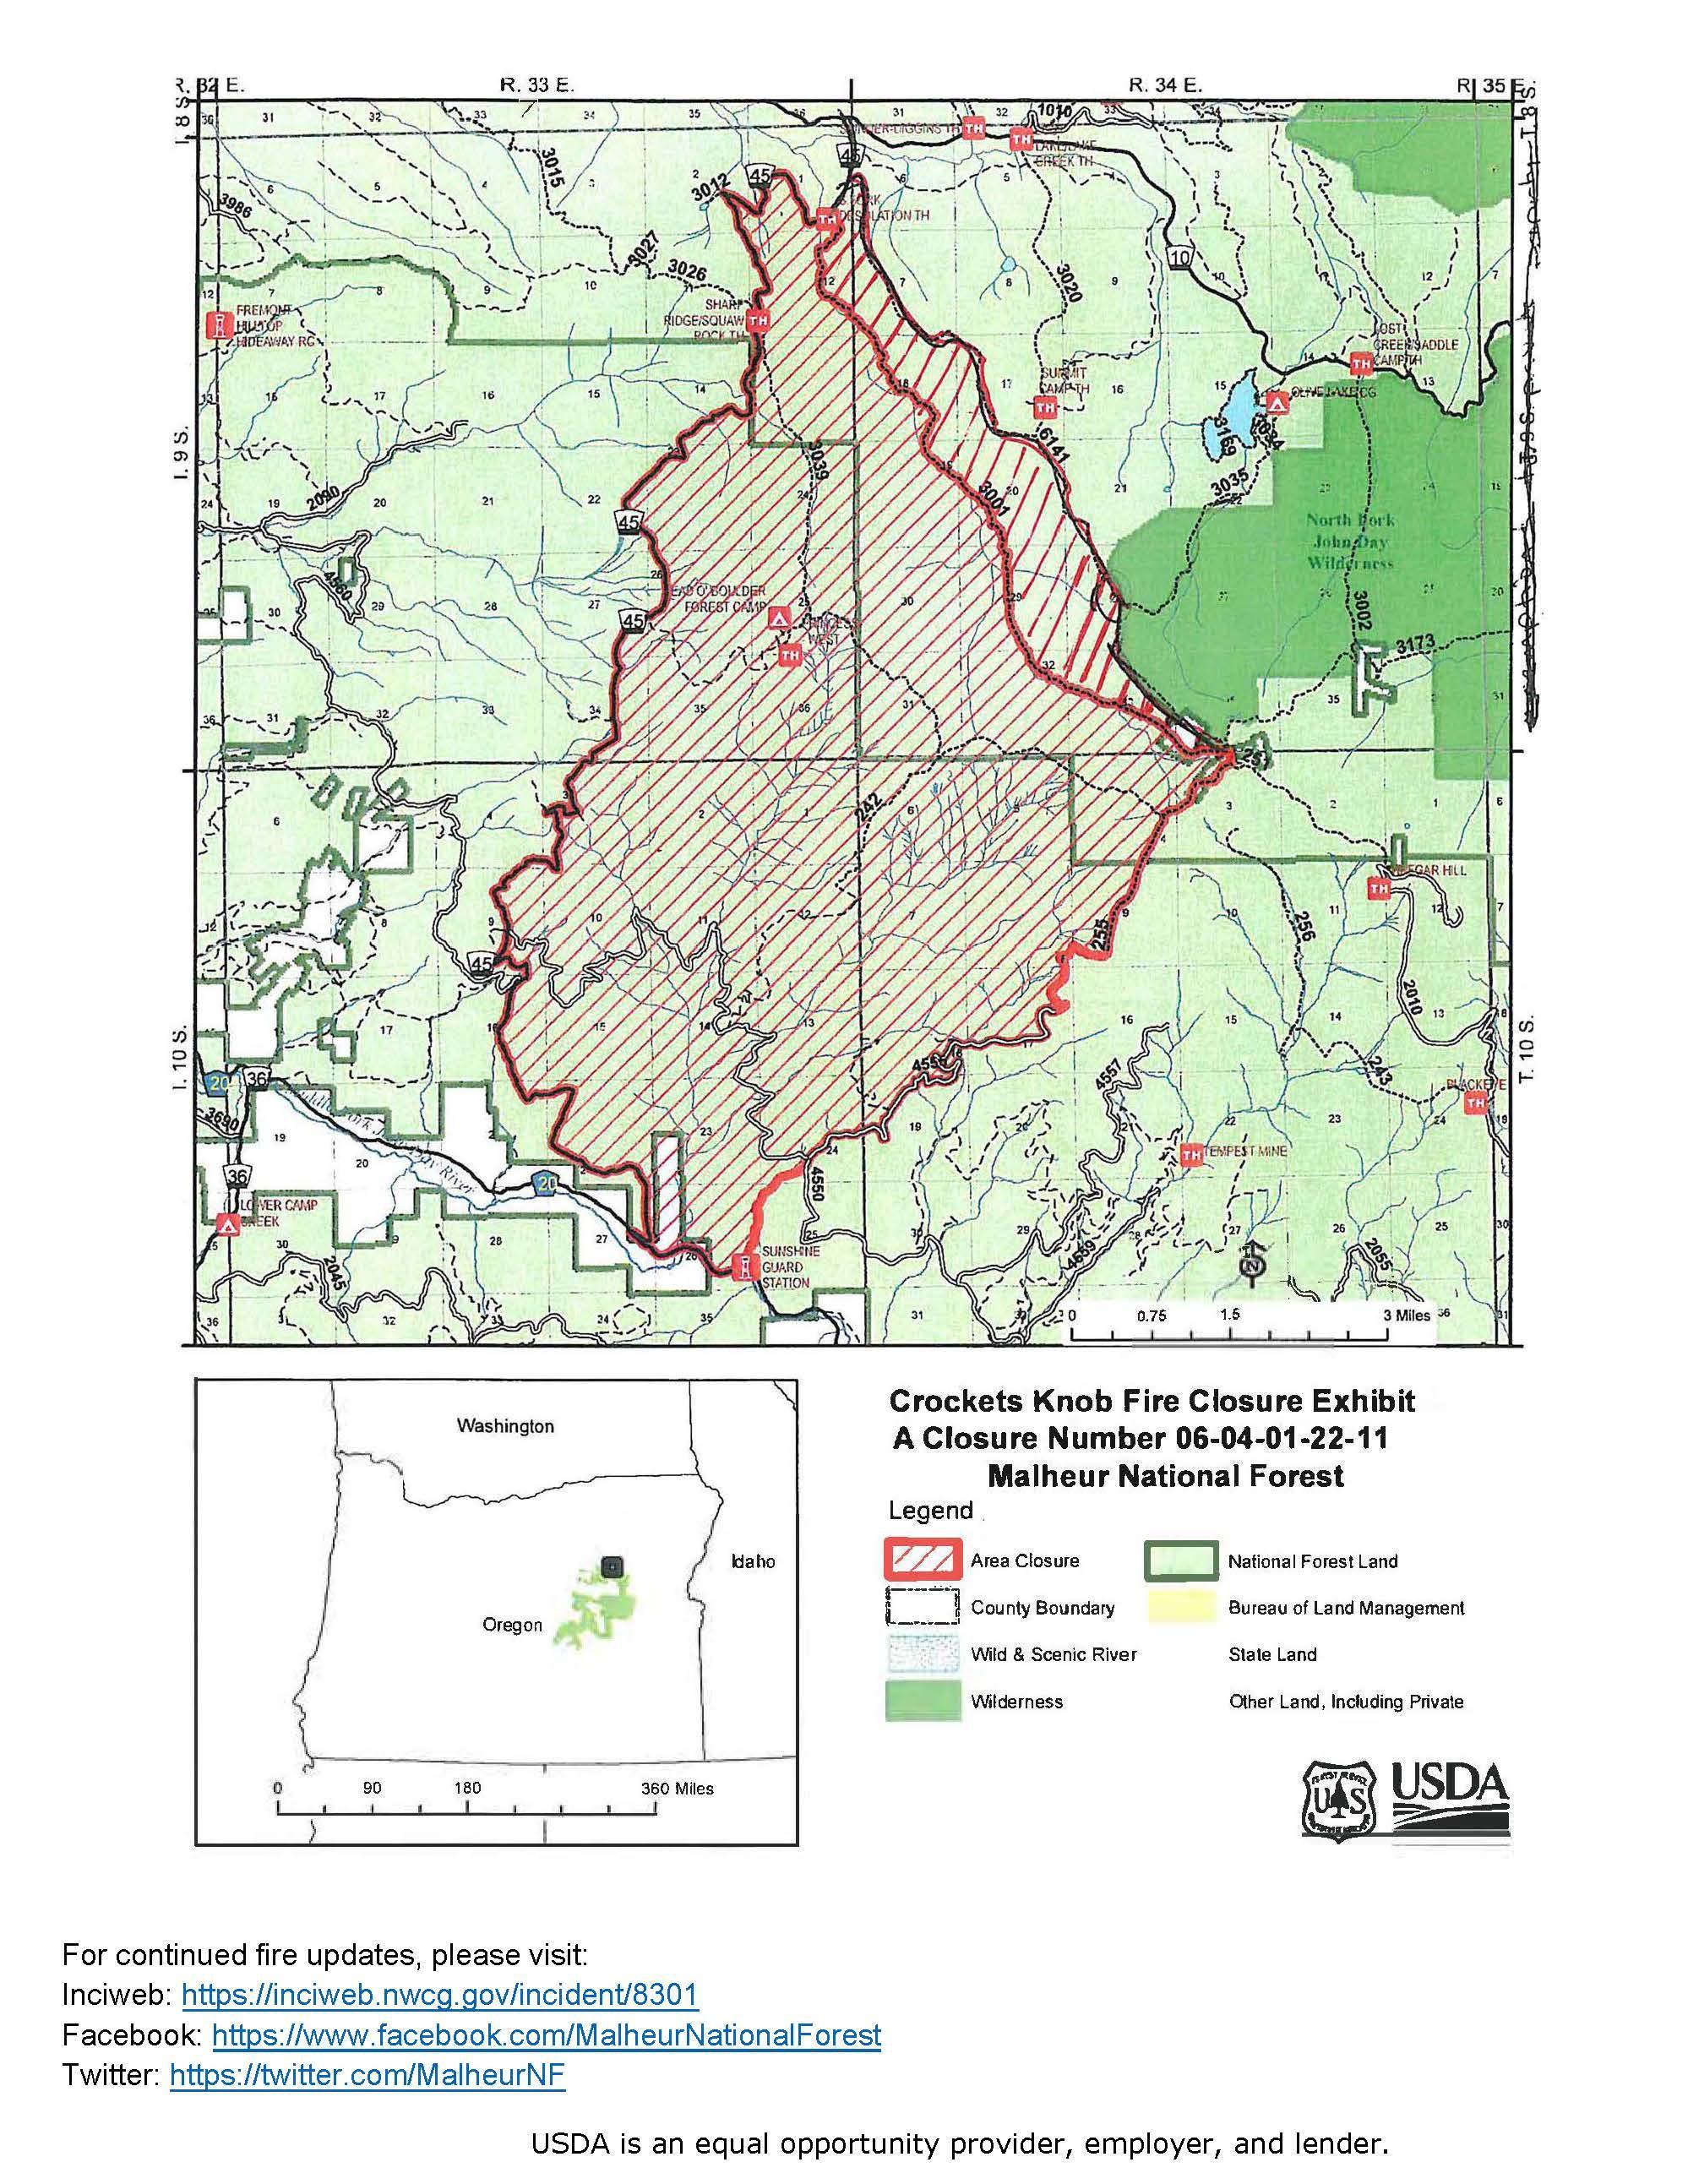 Forest Service Lift of Area Closure 